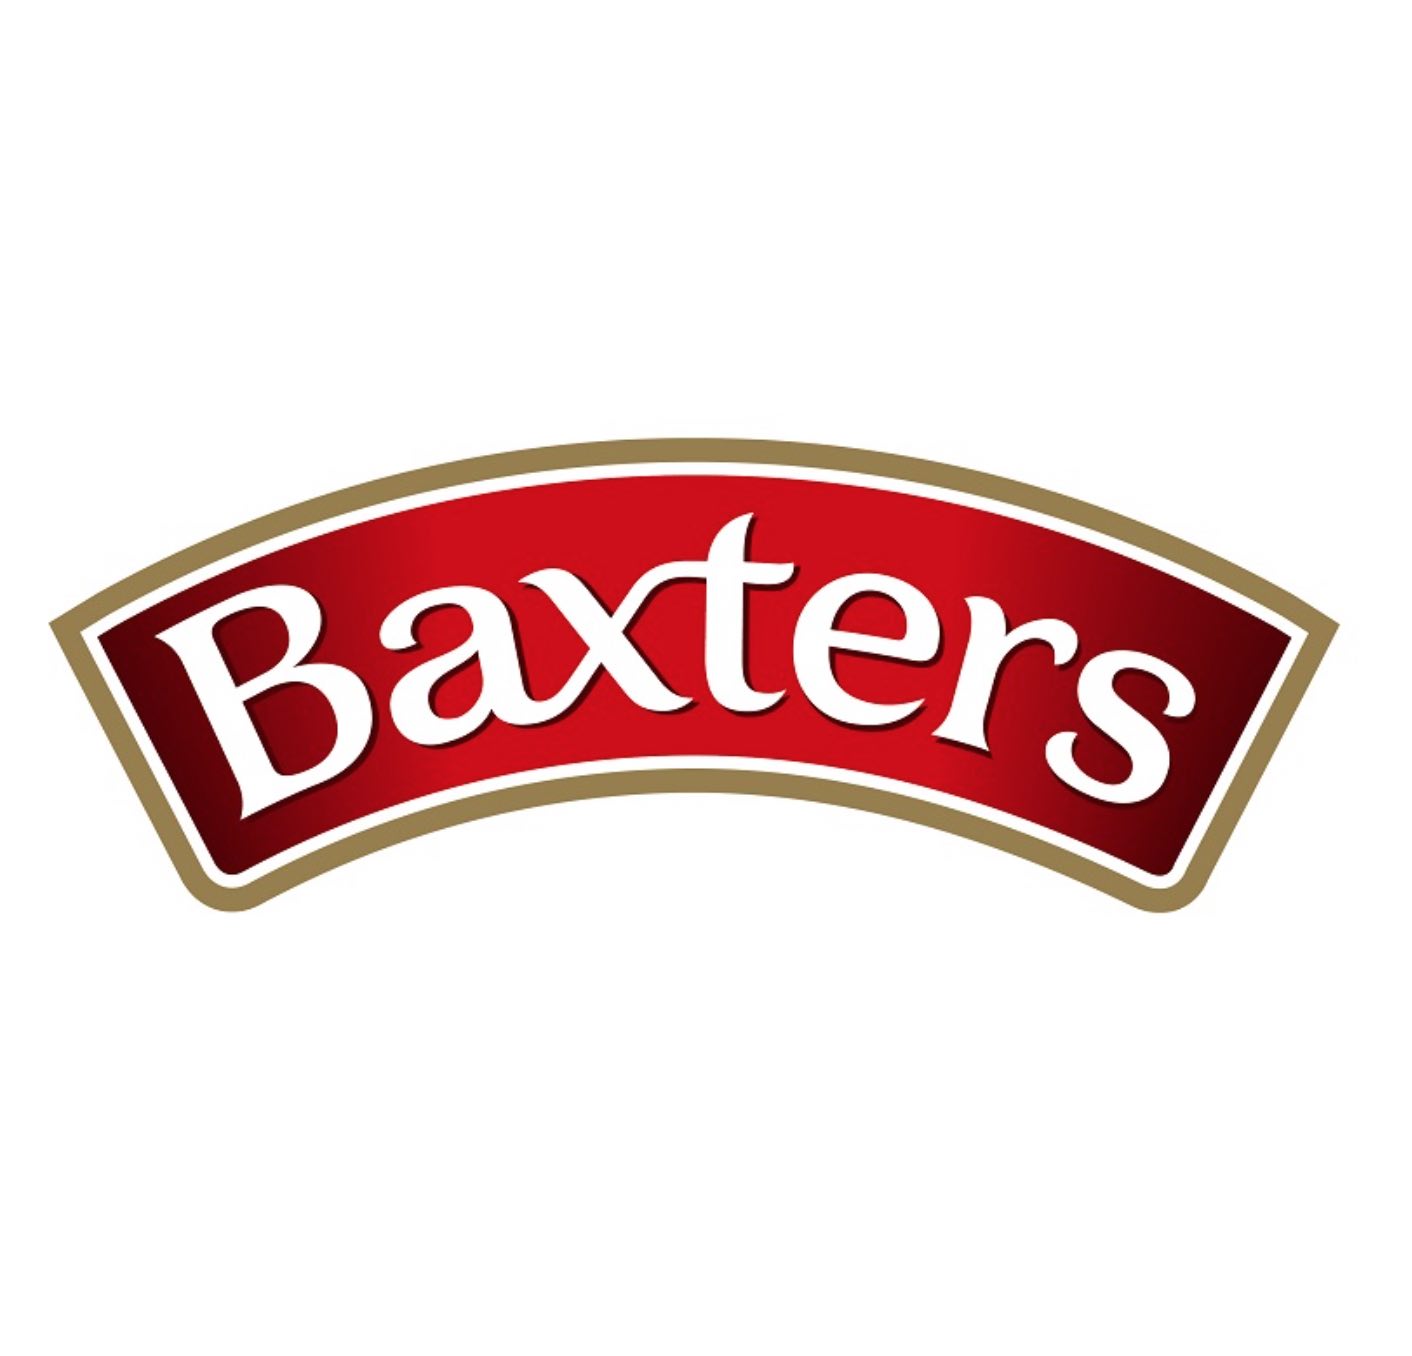 A FRESH APPROACH FROM BAXTERS THE UNION